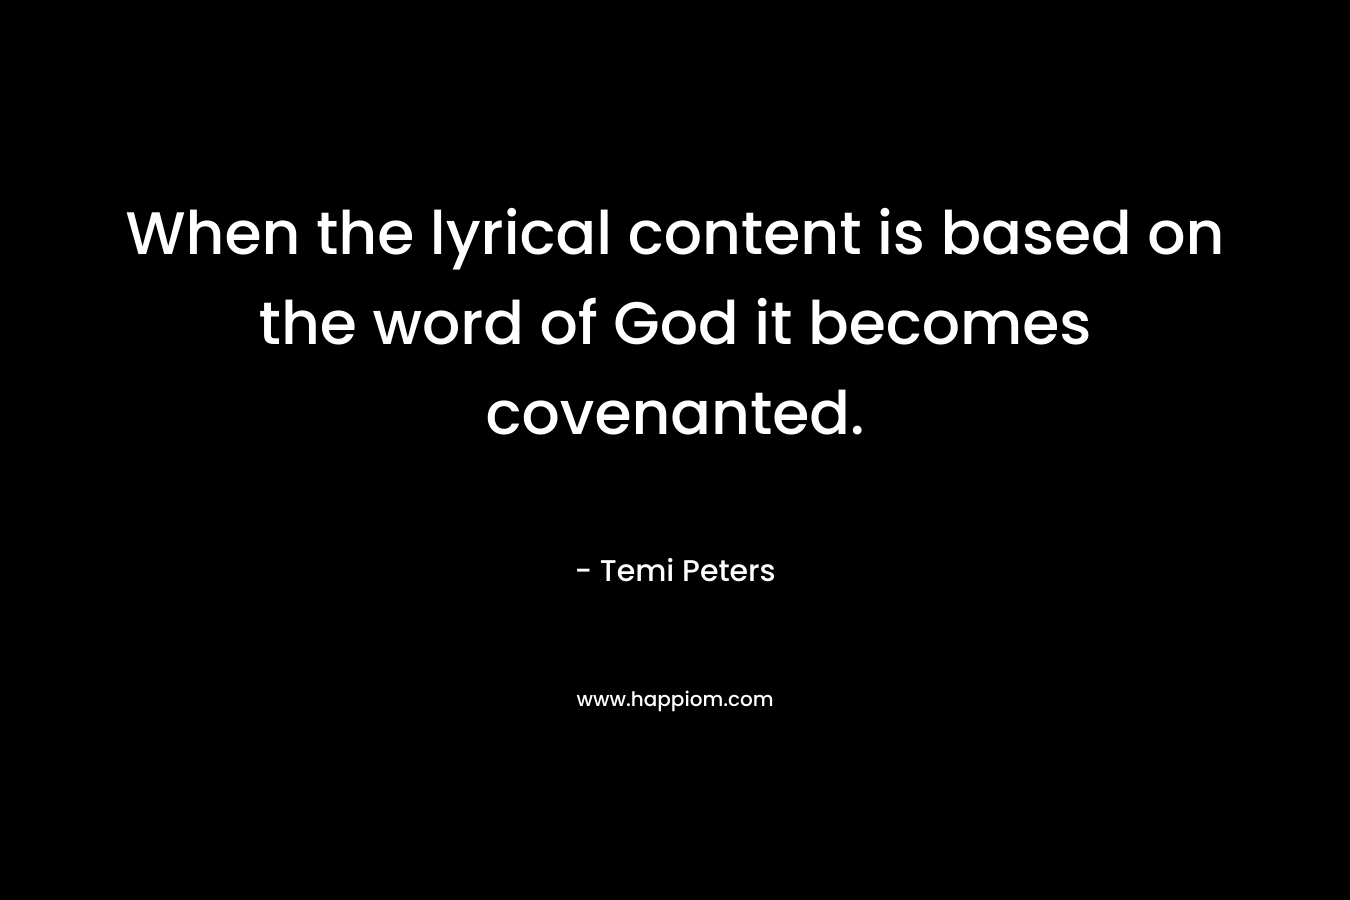 When the lyrical content is based on the word of God it becomes covenanted. – Temi Peters